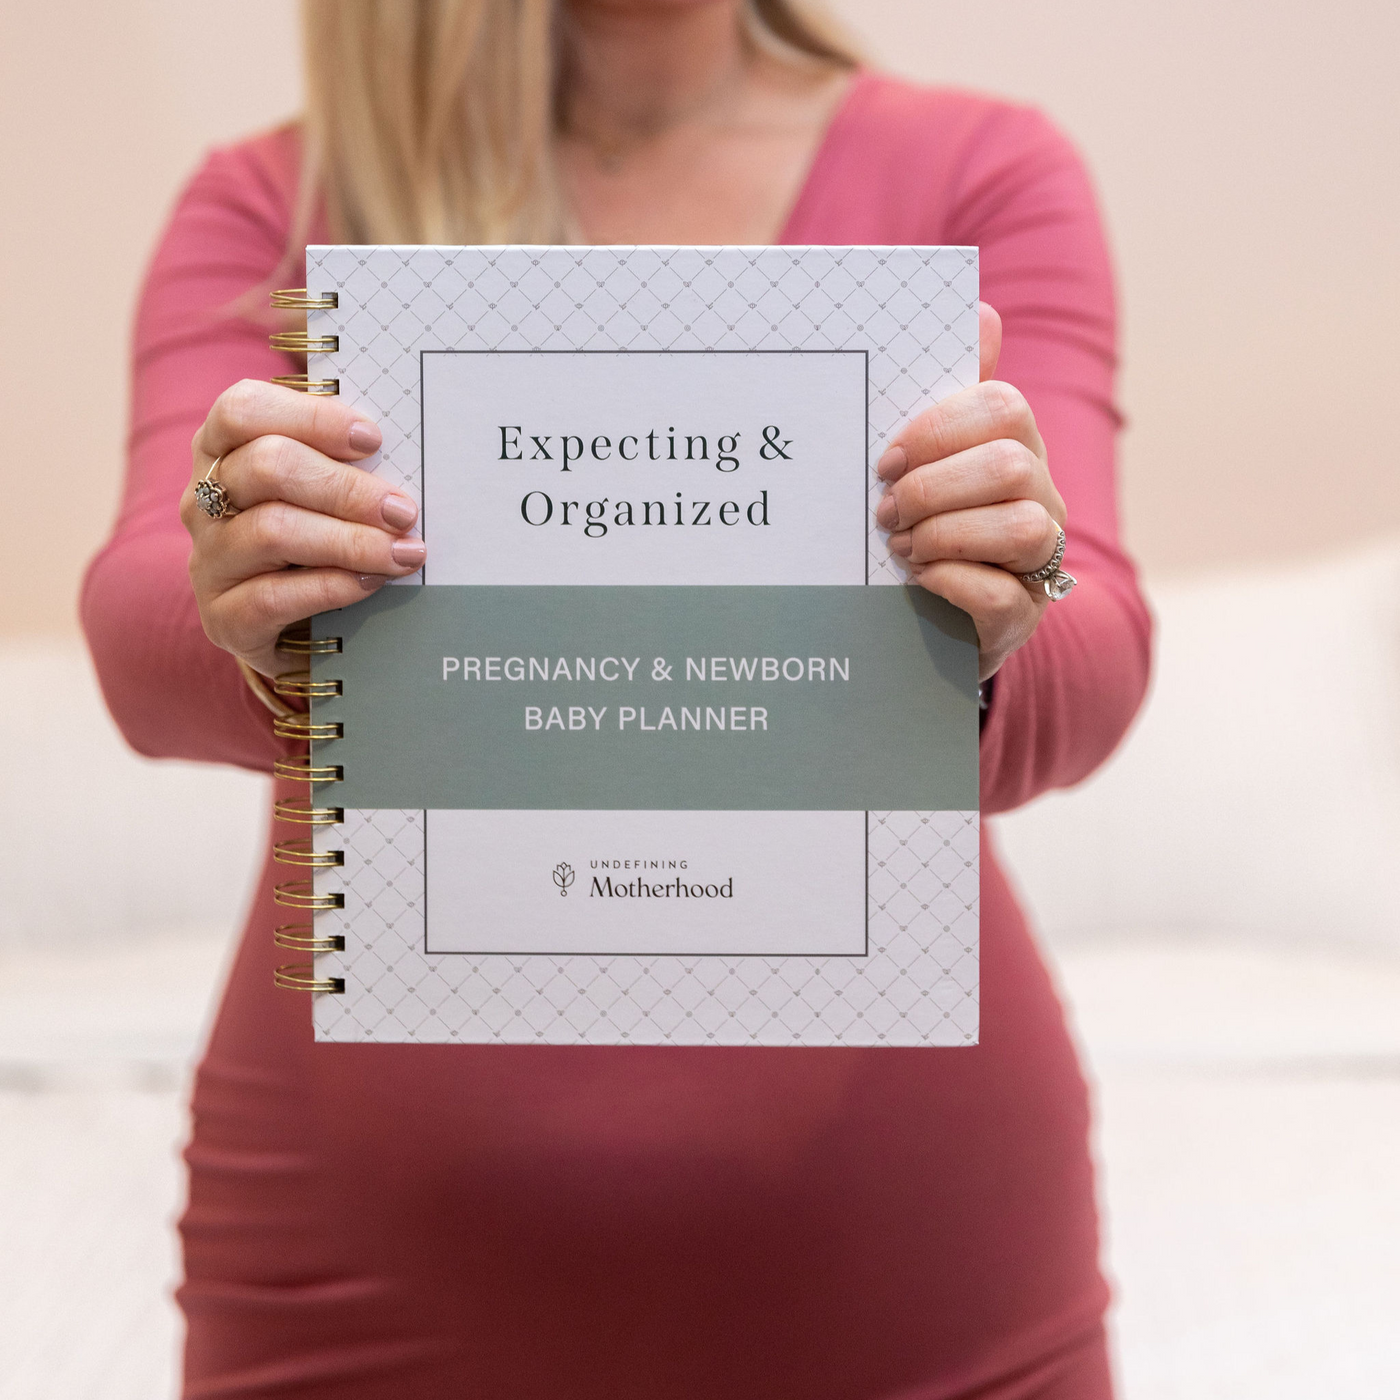 A woman's hands hold a white pregnancy planner in front of her small baby bump. The baby planner is white with a hardcover and gold o-ring binding, with a soft green stripe in the middle. It says Expecting & Organized: Pregnancy & Newborn Baby Planner by Undefining Motherhood